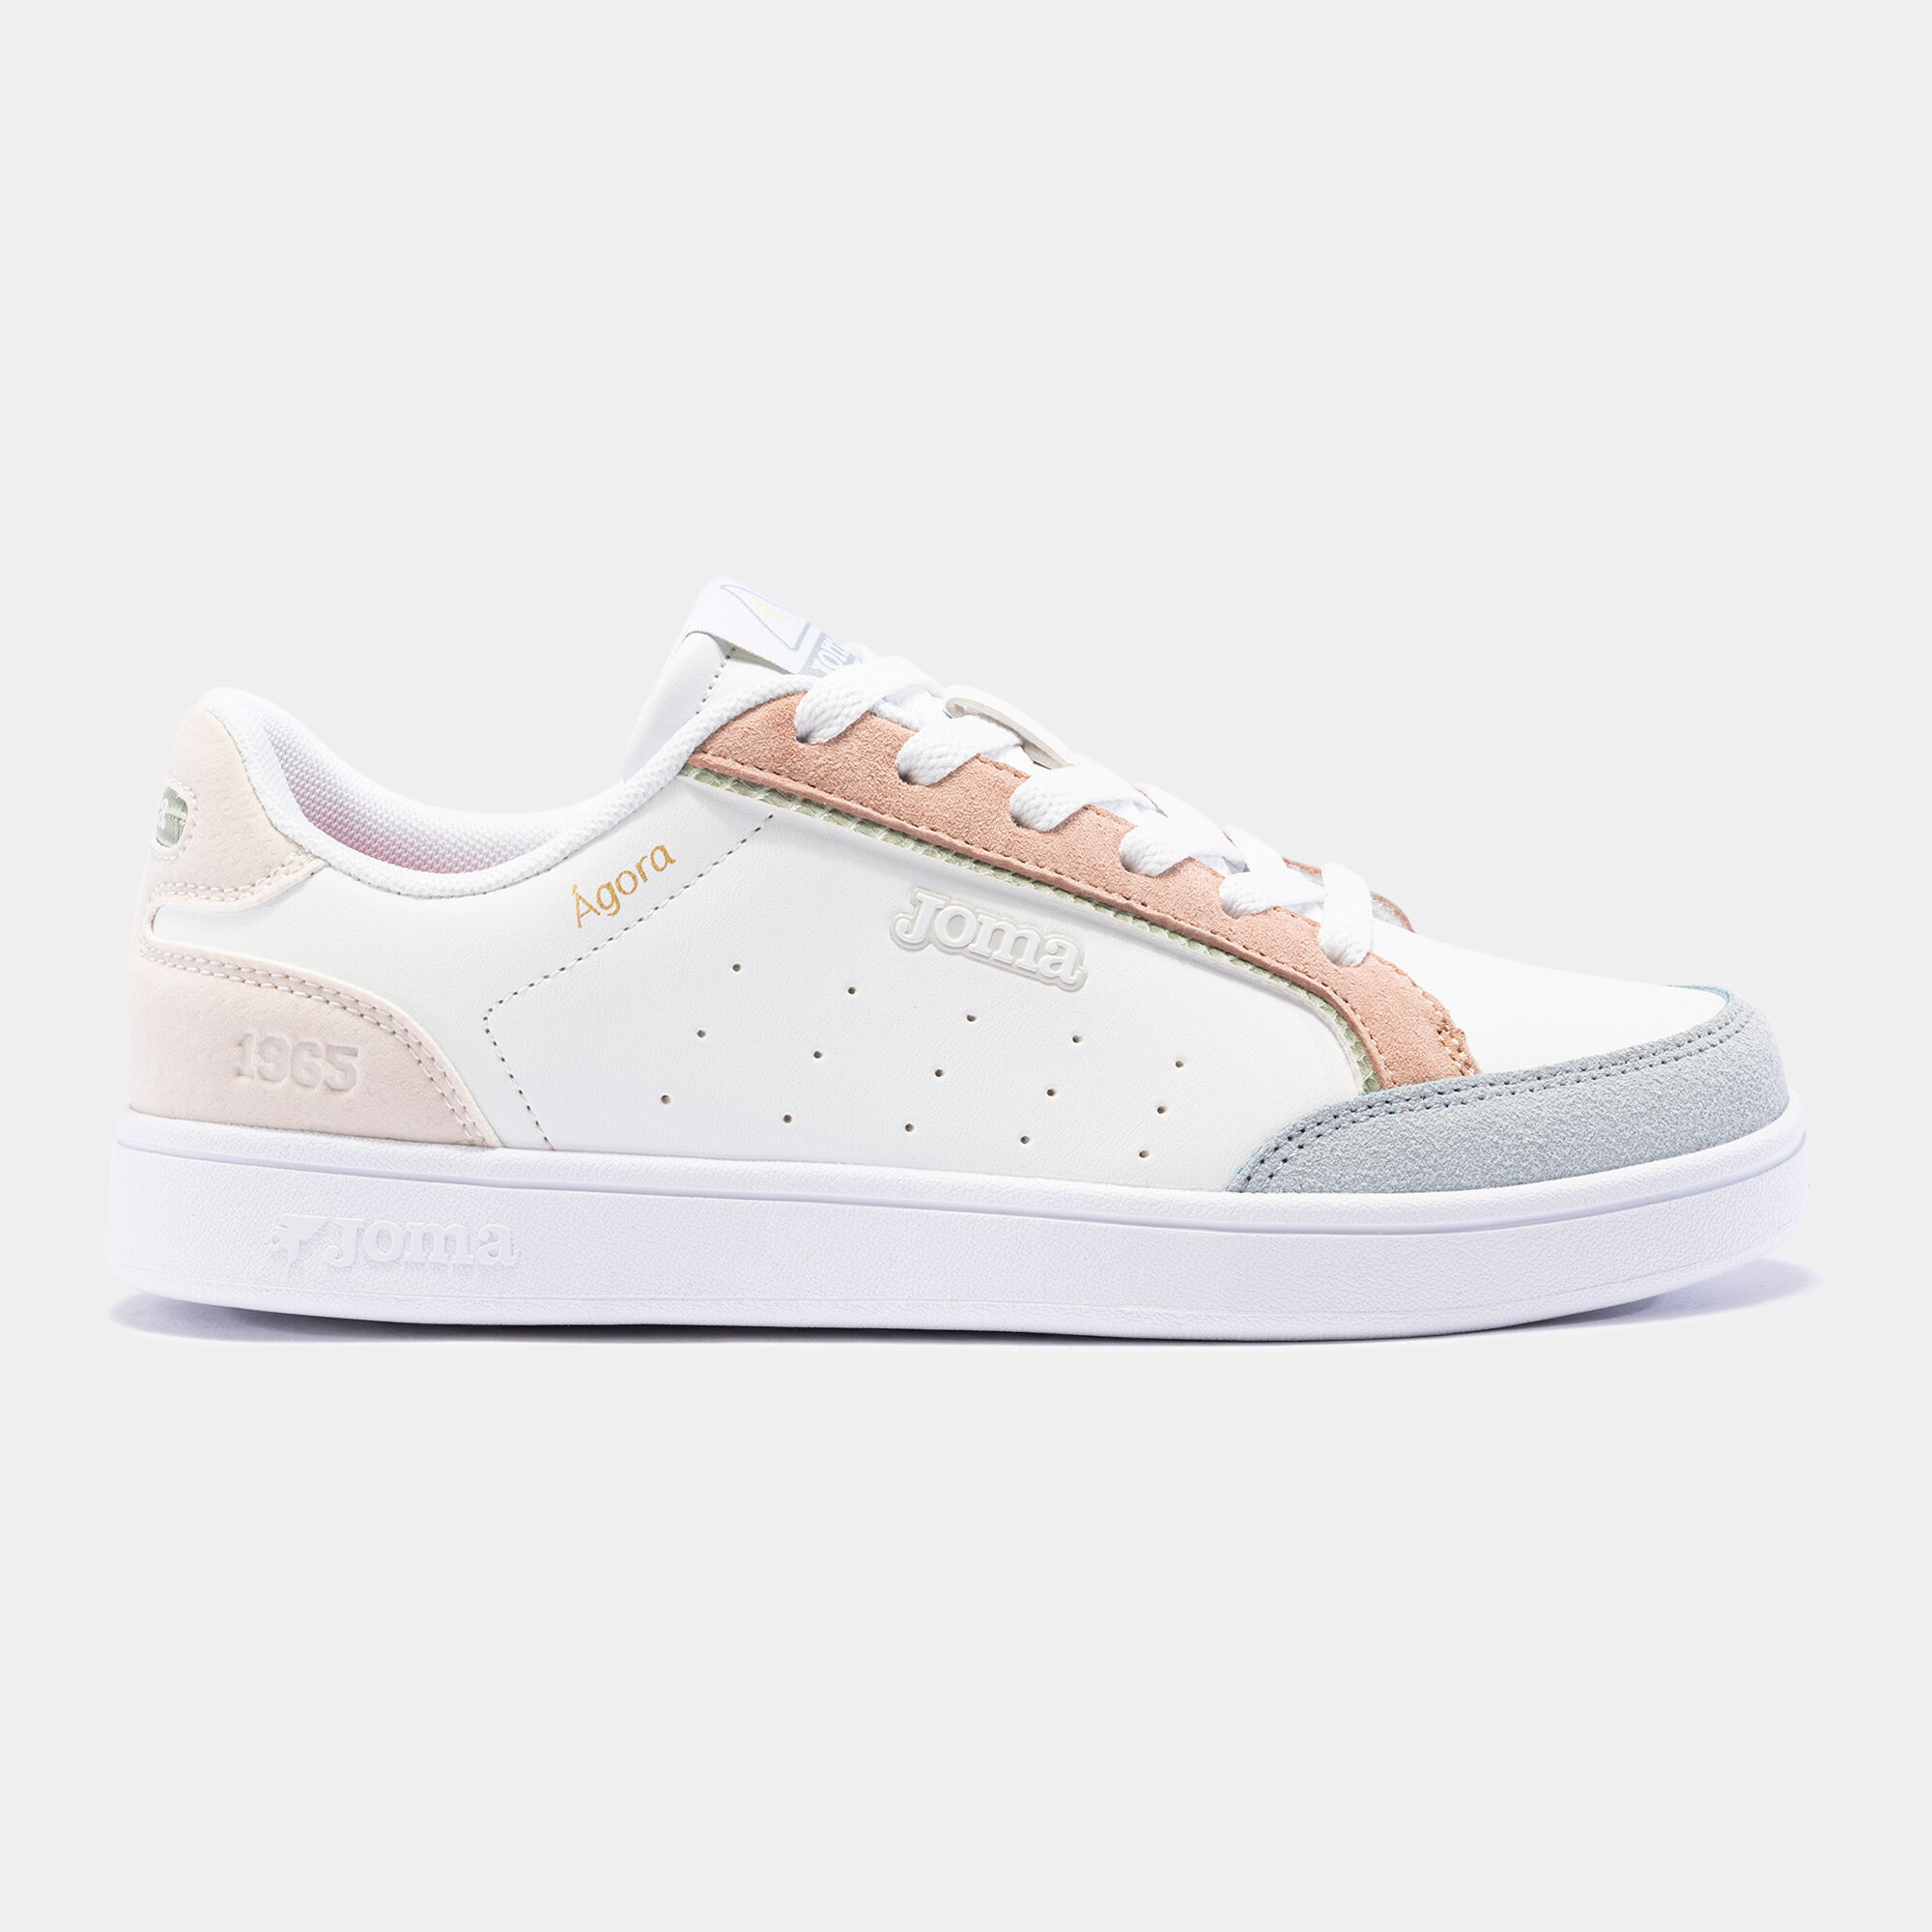 Chaussures casual C.Agora Lady 24 femme blanc rose